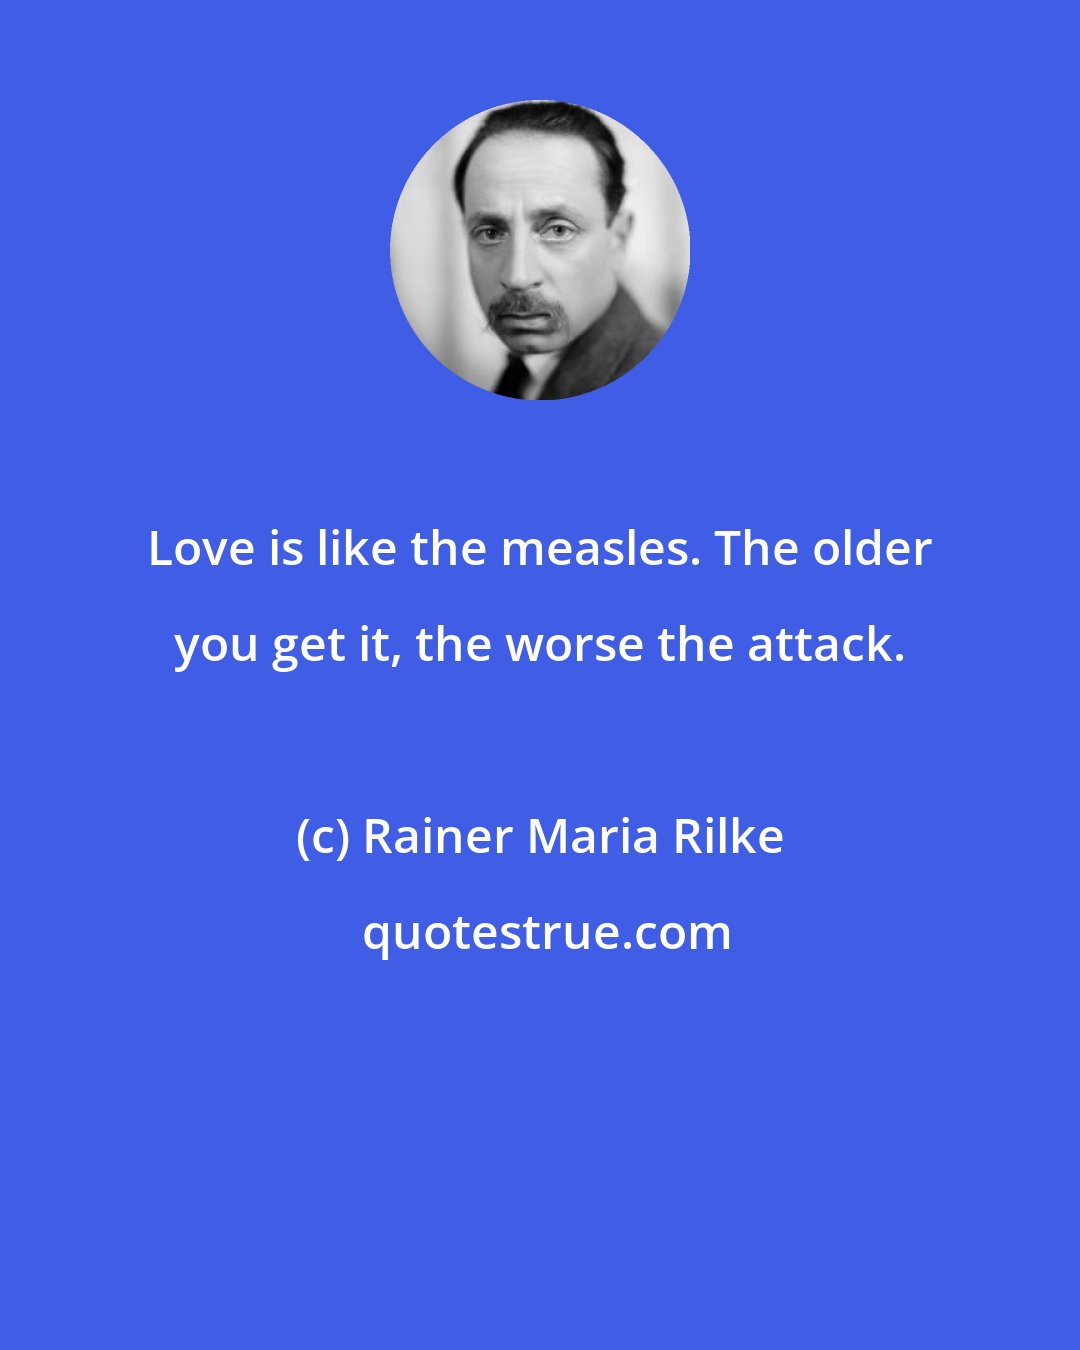 Rainer Maria Rilke: Love is like the measles. The older you get it, the worse the attack.